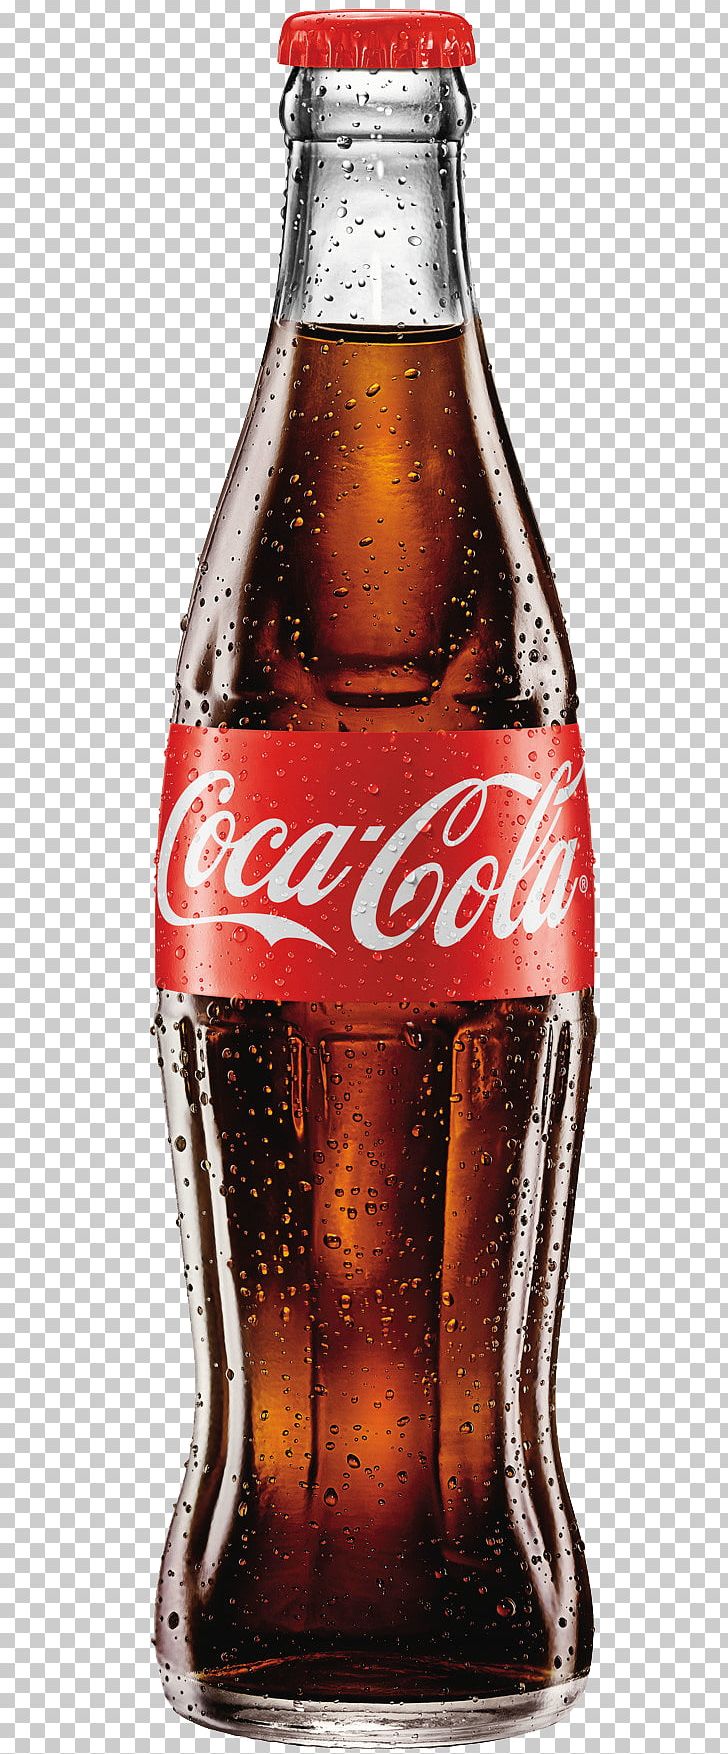 Caffeine-Free Coca-Cola Soft Drink PNG, Clipart, Beer Bottle, Bottle, Bottles, Caffeinefree Cocacola, Carbonated Soft Drinks Free PNG Download